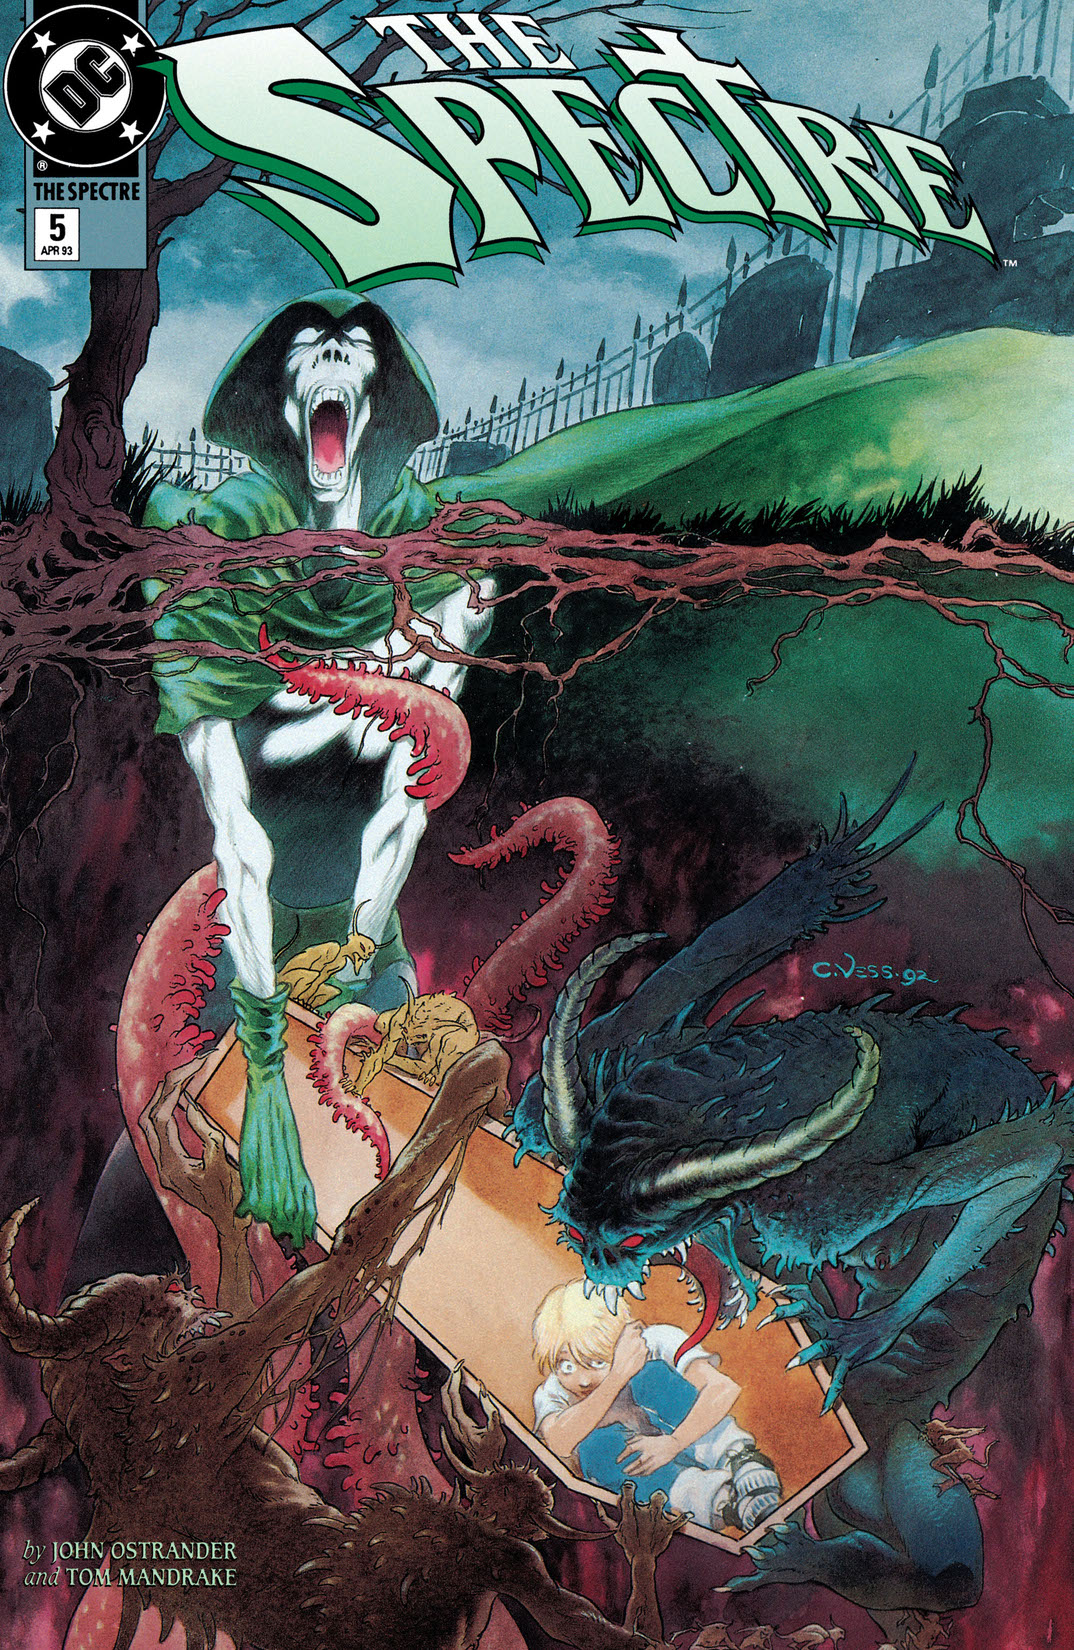 The Spectre (1992-) #5 preview images